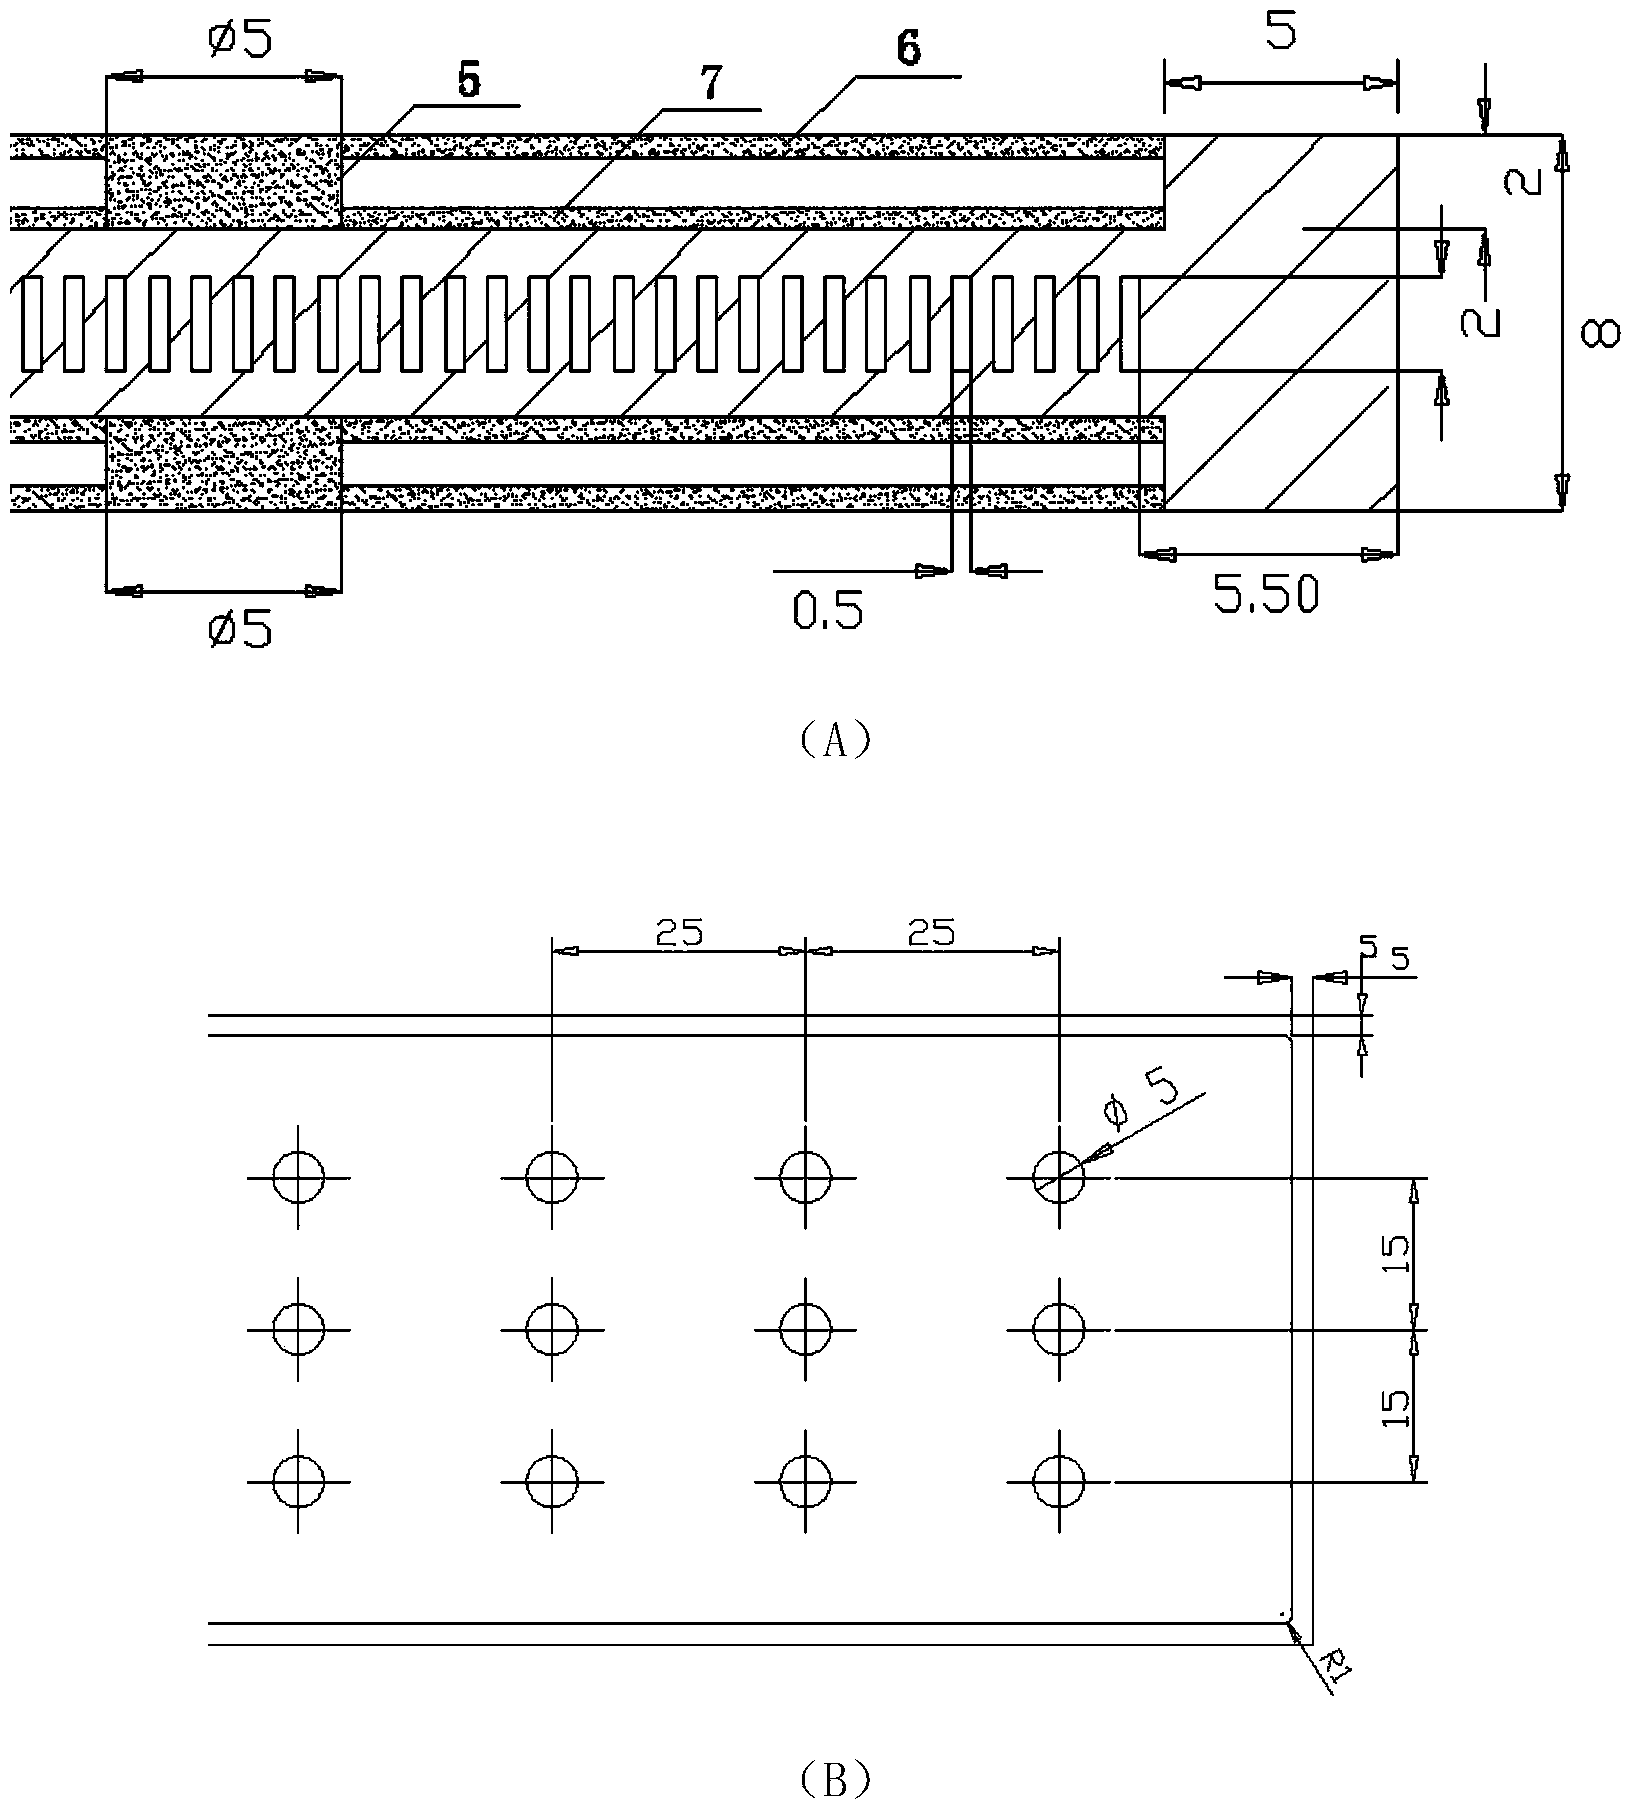 Temperature averaging device of steam chamber heat pipe/microchannel cold plate composite structure